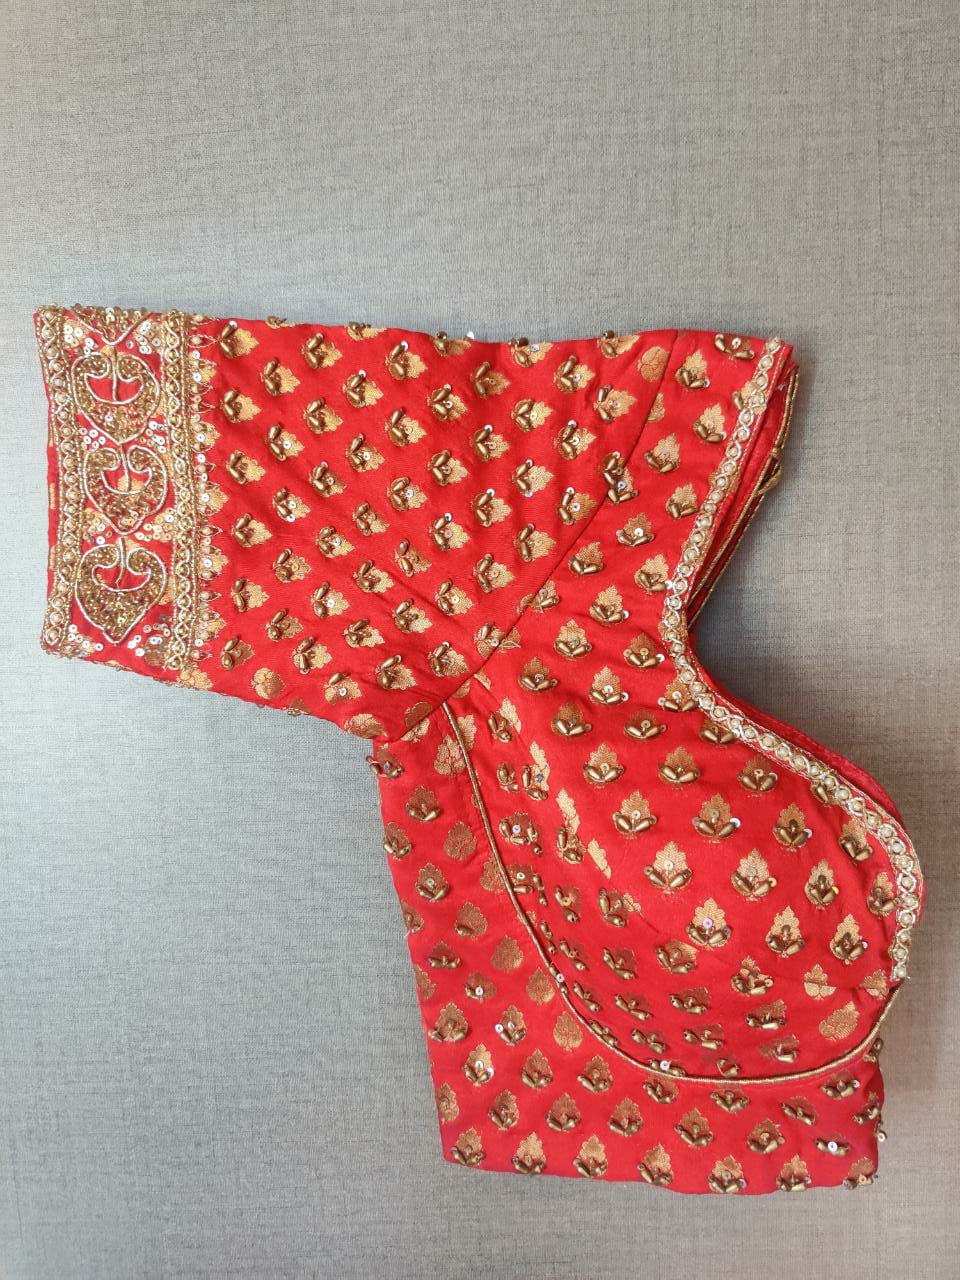 Buy stunning red embroidered Banarasi saree blouse online in USA. Elevate your Indian ethnic saree looks with beautiful readymade sari blouse, embroidered saree blouses, Banarasi saree blouse, designer sari blouses, sleeveless saree blouses from Pure Elegance Indian fashion store in USA.-sleeves